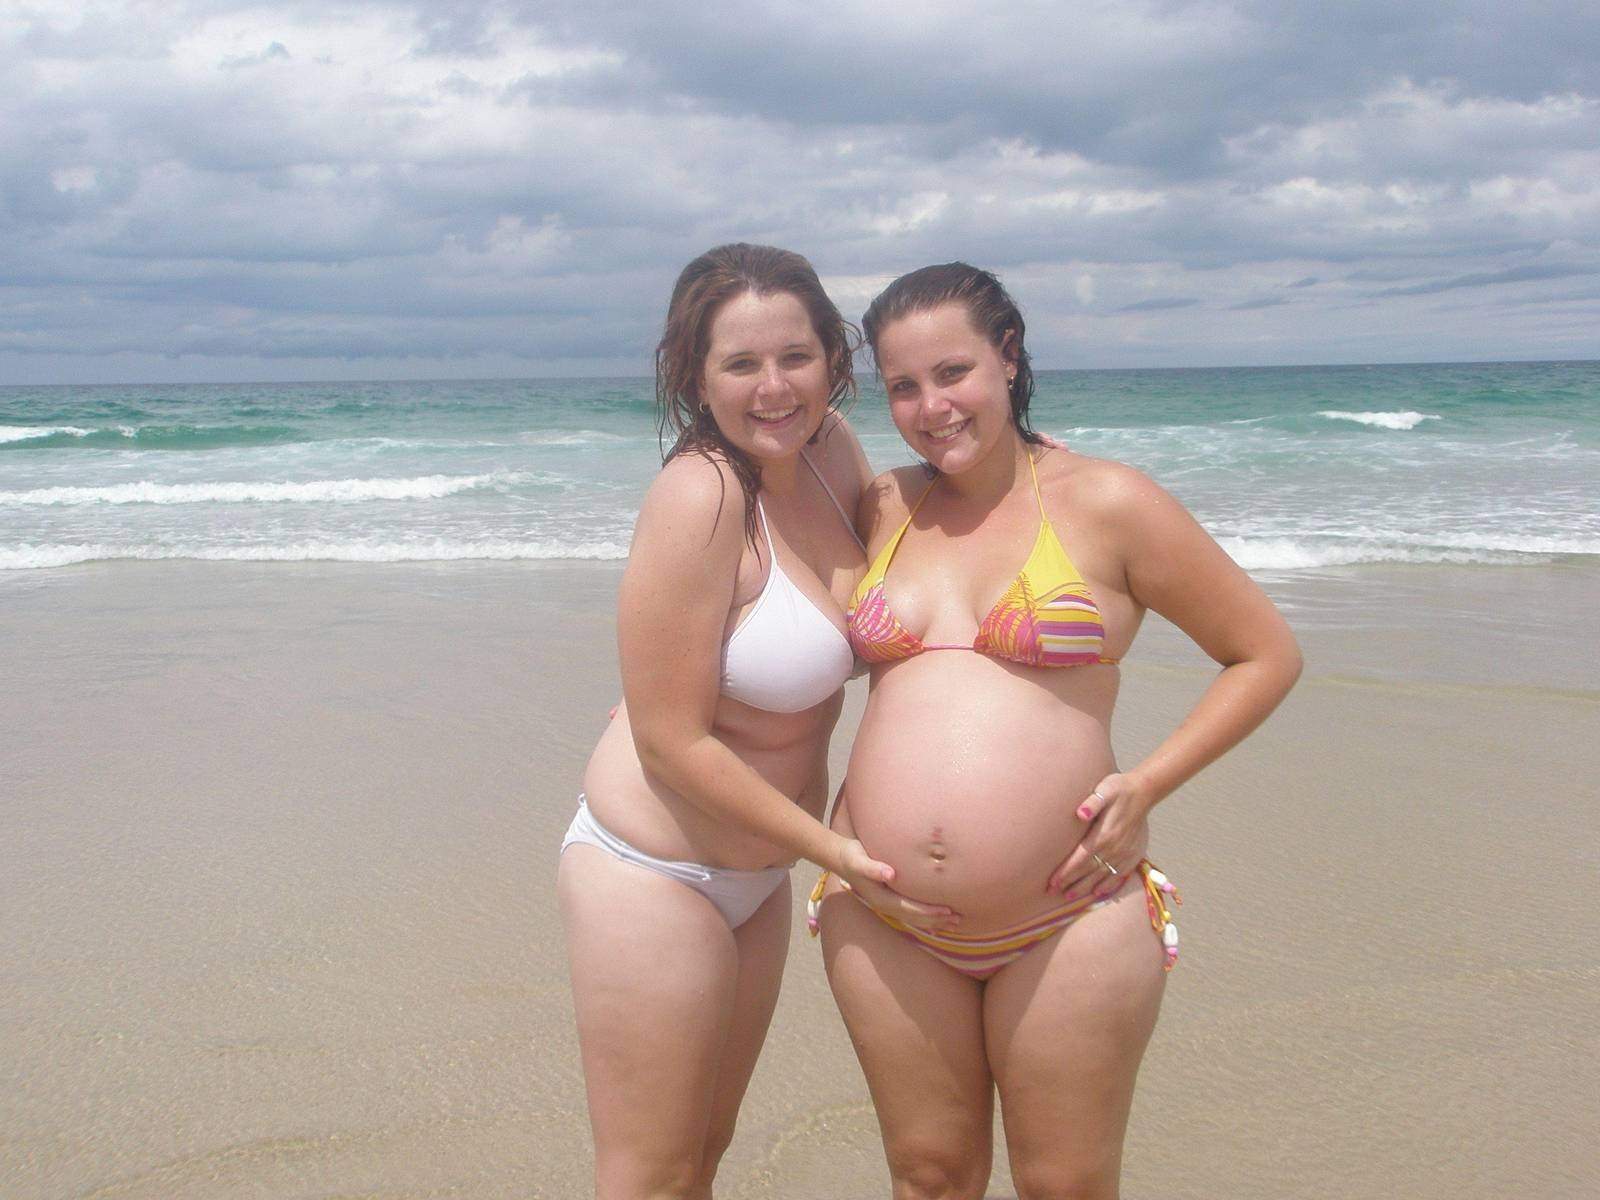 Pregnant with a girlfriend on the beach Porn Pic - EPORNER